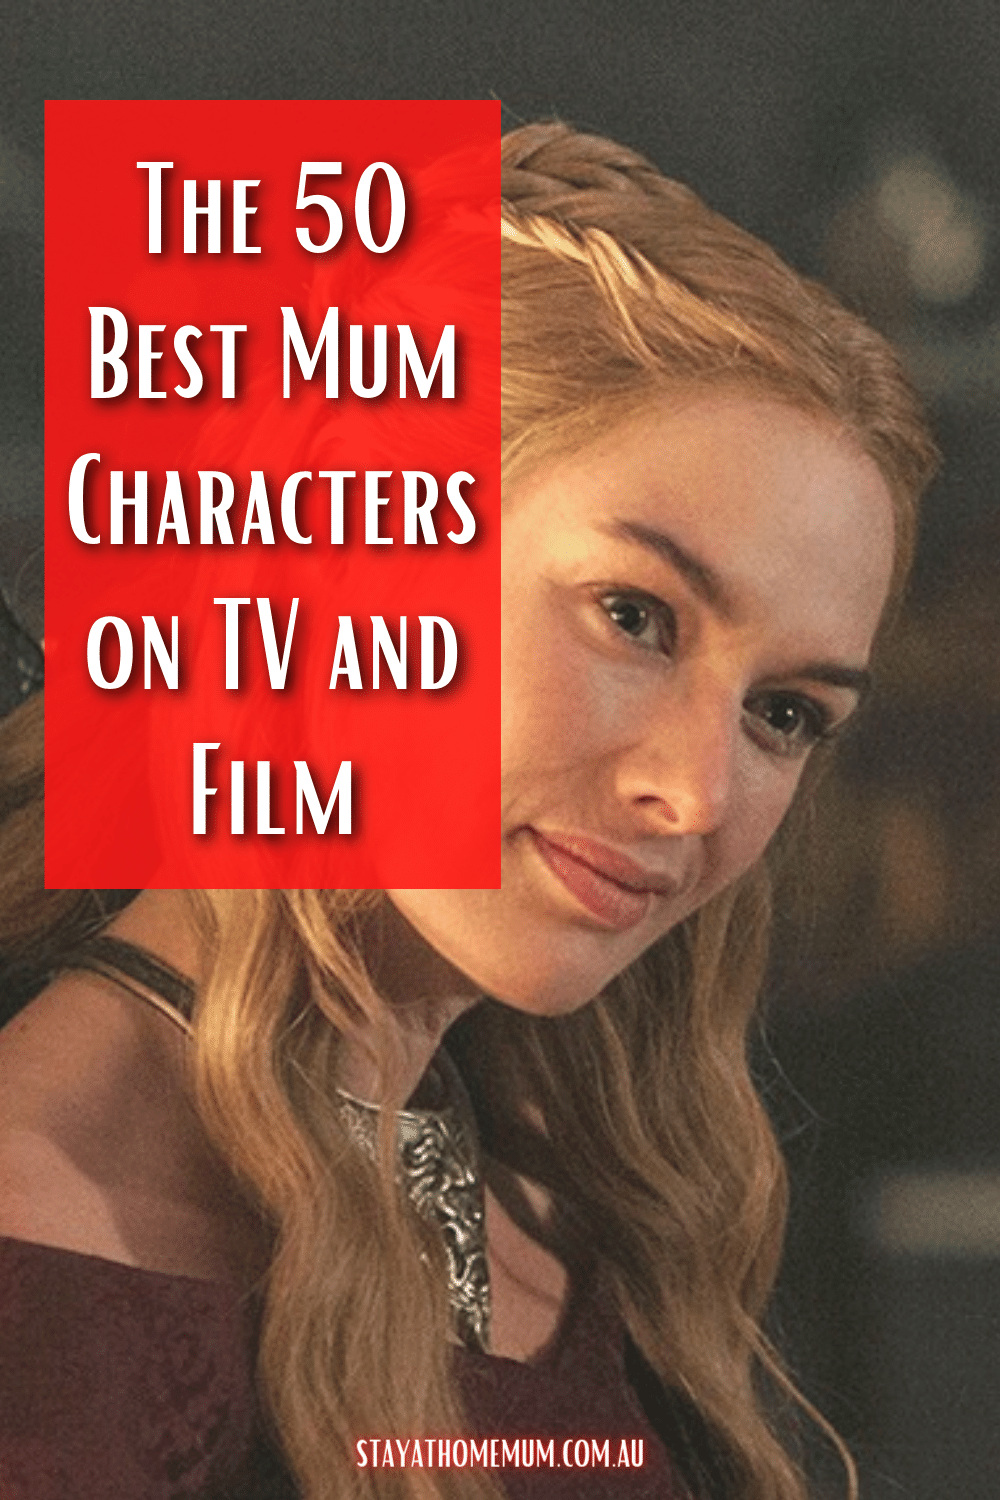 The 50 Best Mum Characters on TV and Film | Stay At Home Mum